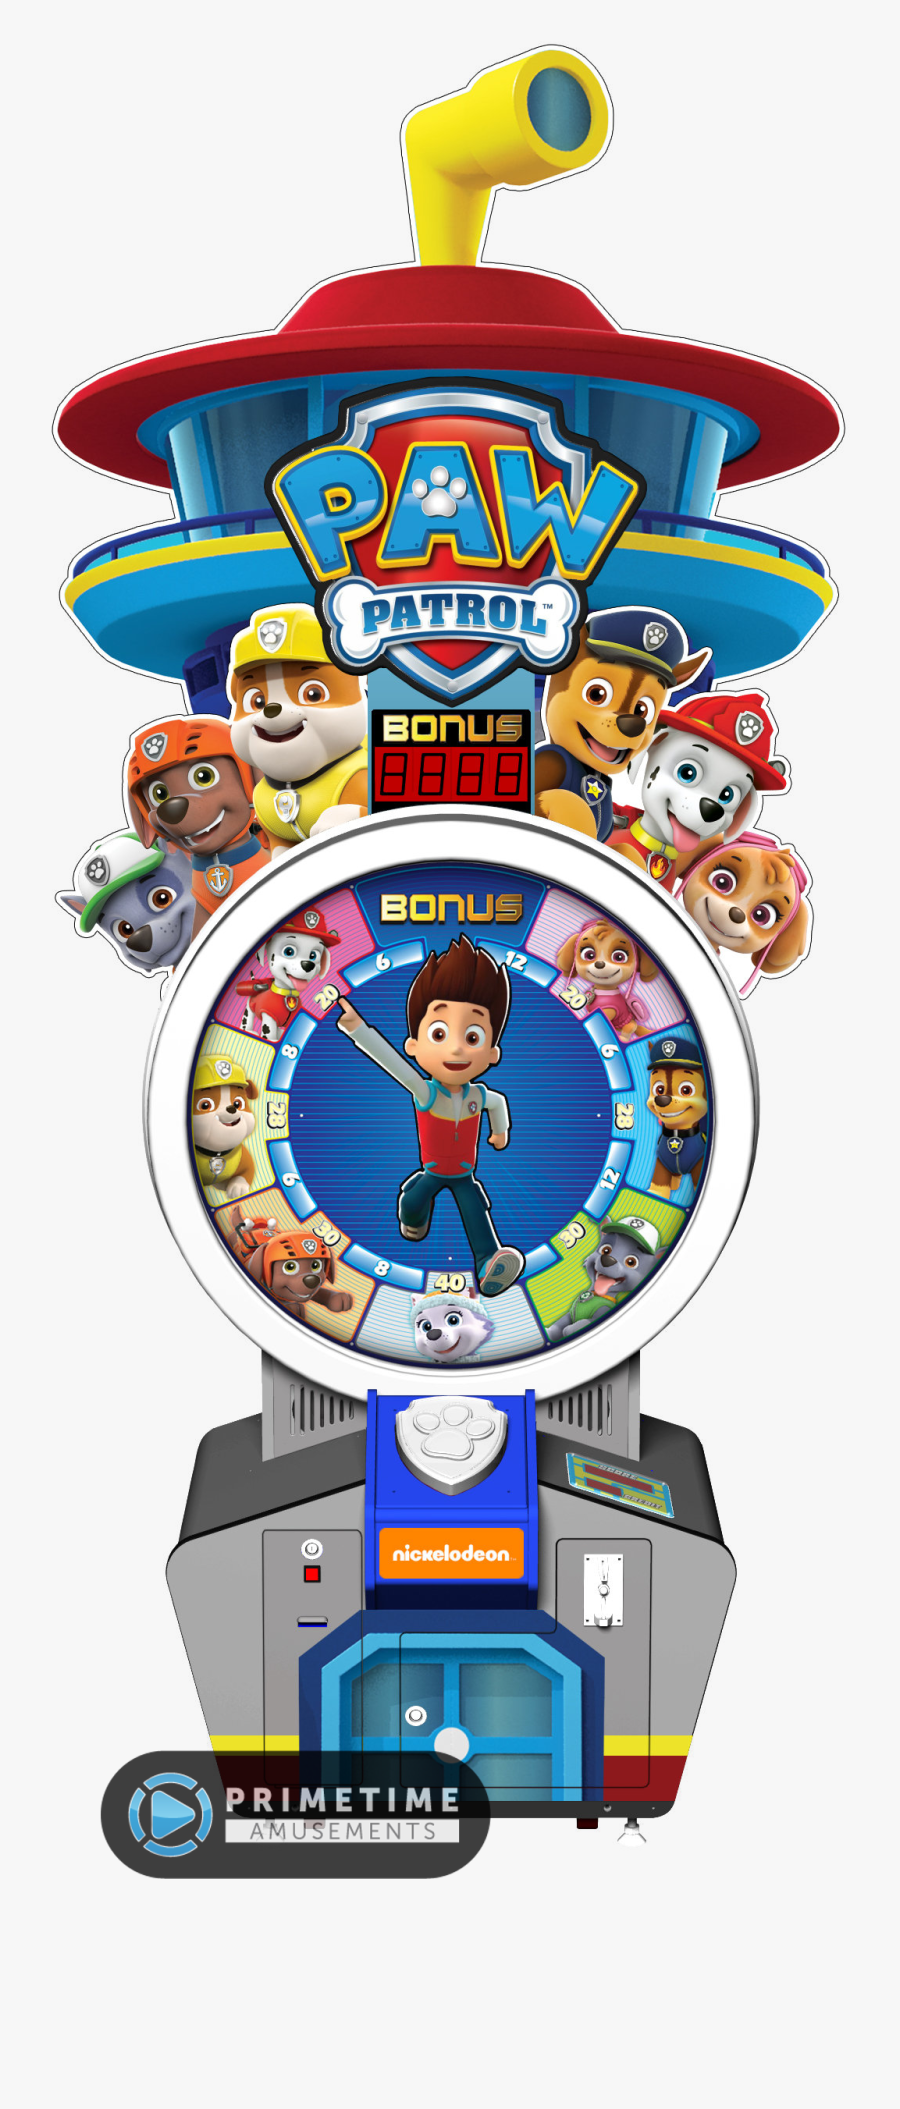 Paw Patrol Redemption Arcade Game By Andamiro And Nickelodeon - Paw Patrol Andamiro, Transparent Clipart